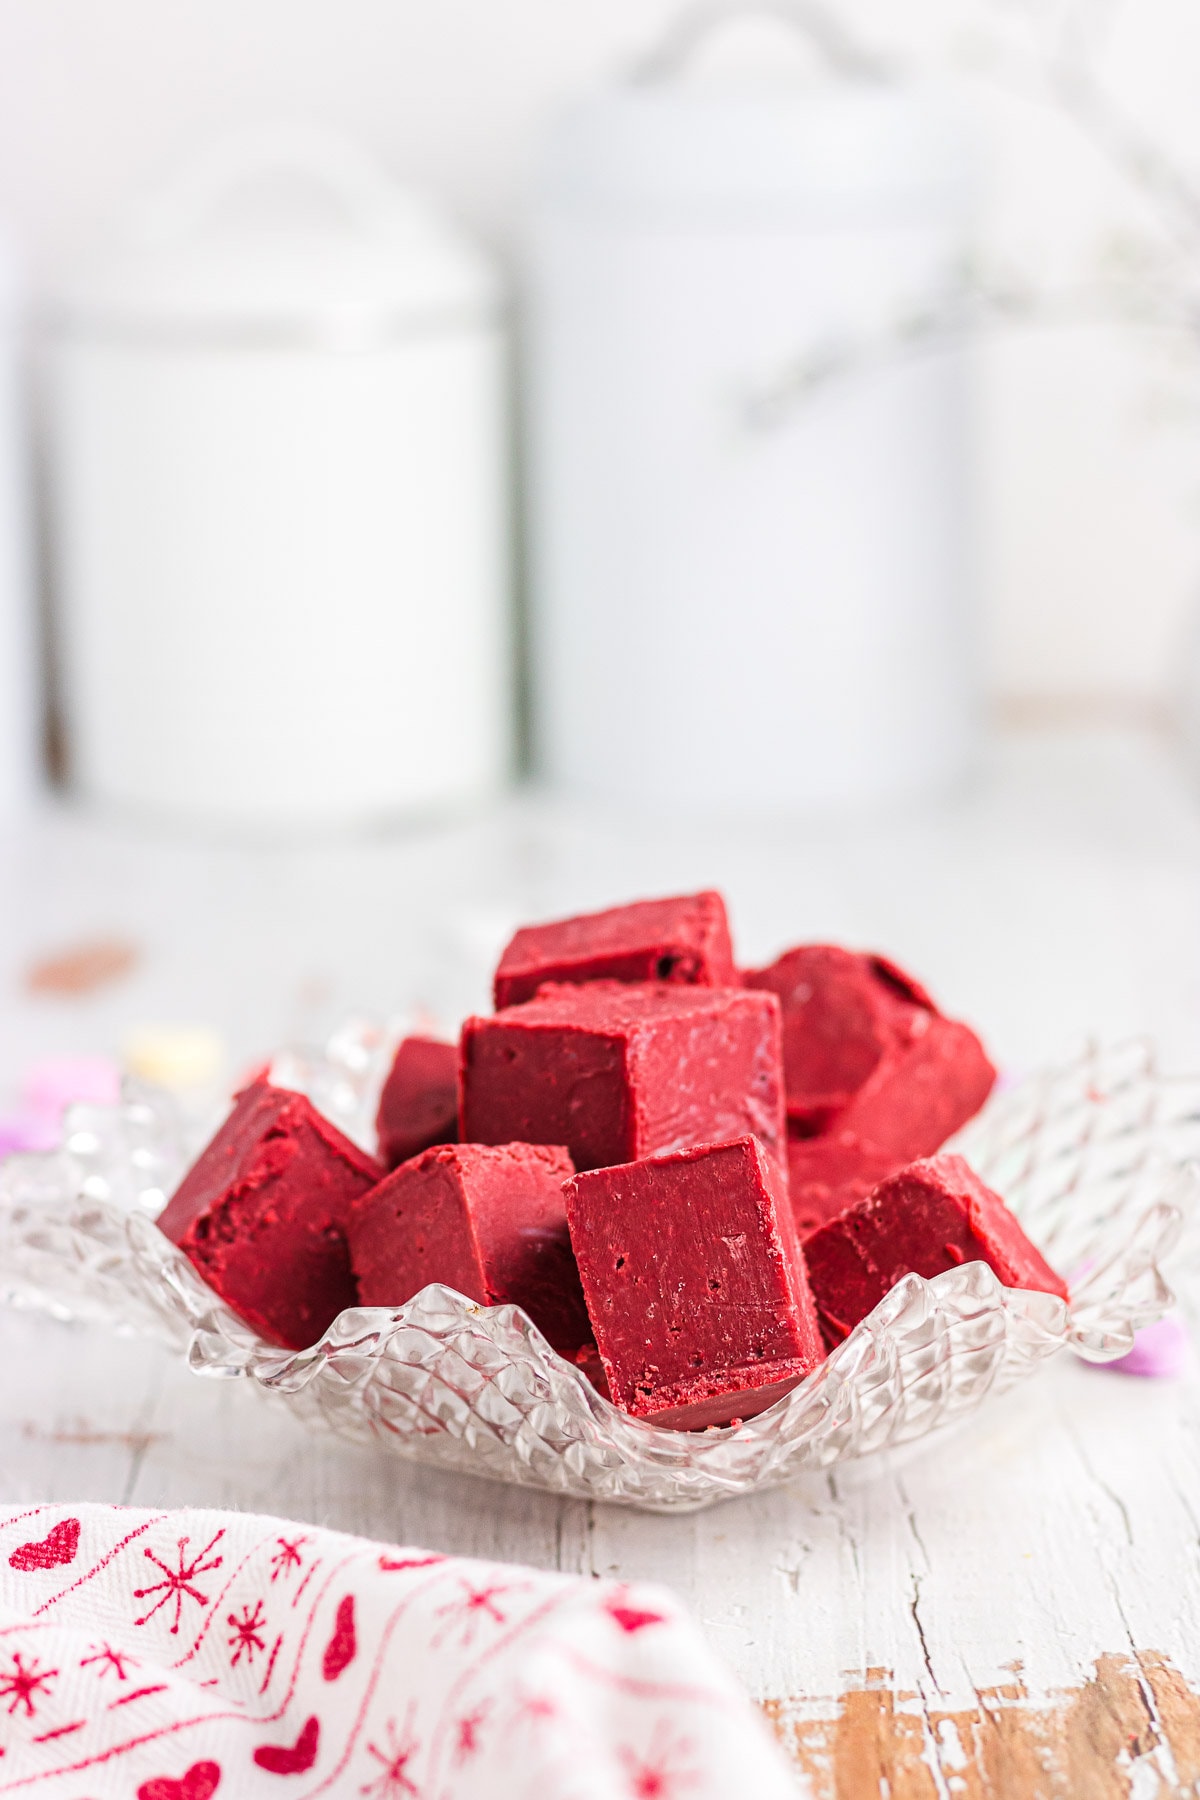 Pieces of red velvet fudge in a decorative glass bowl.